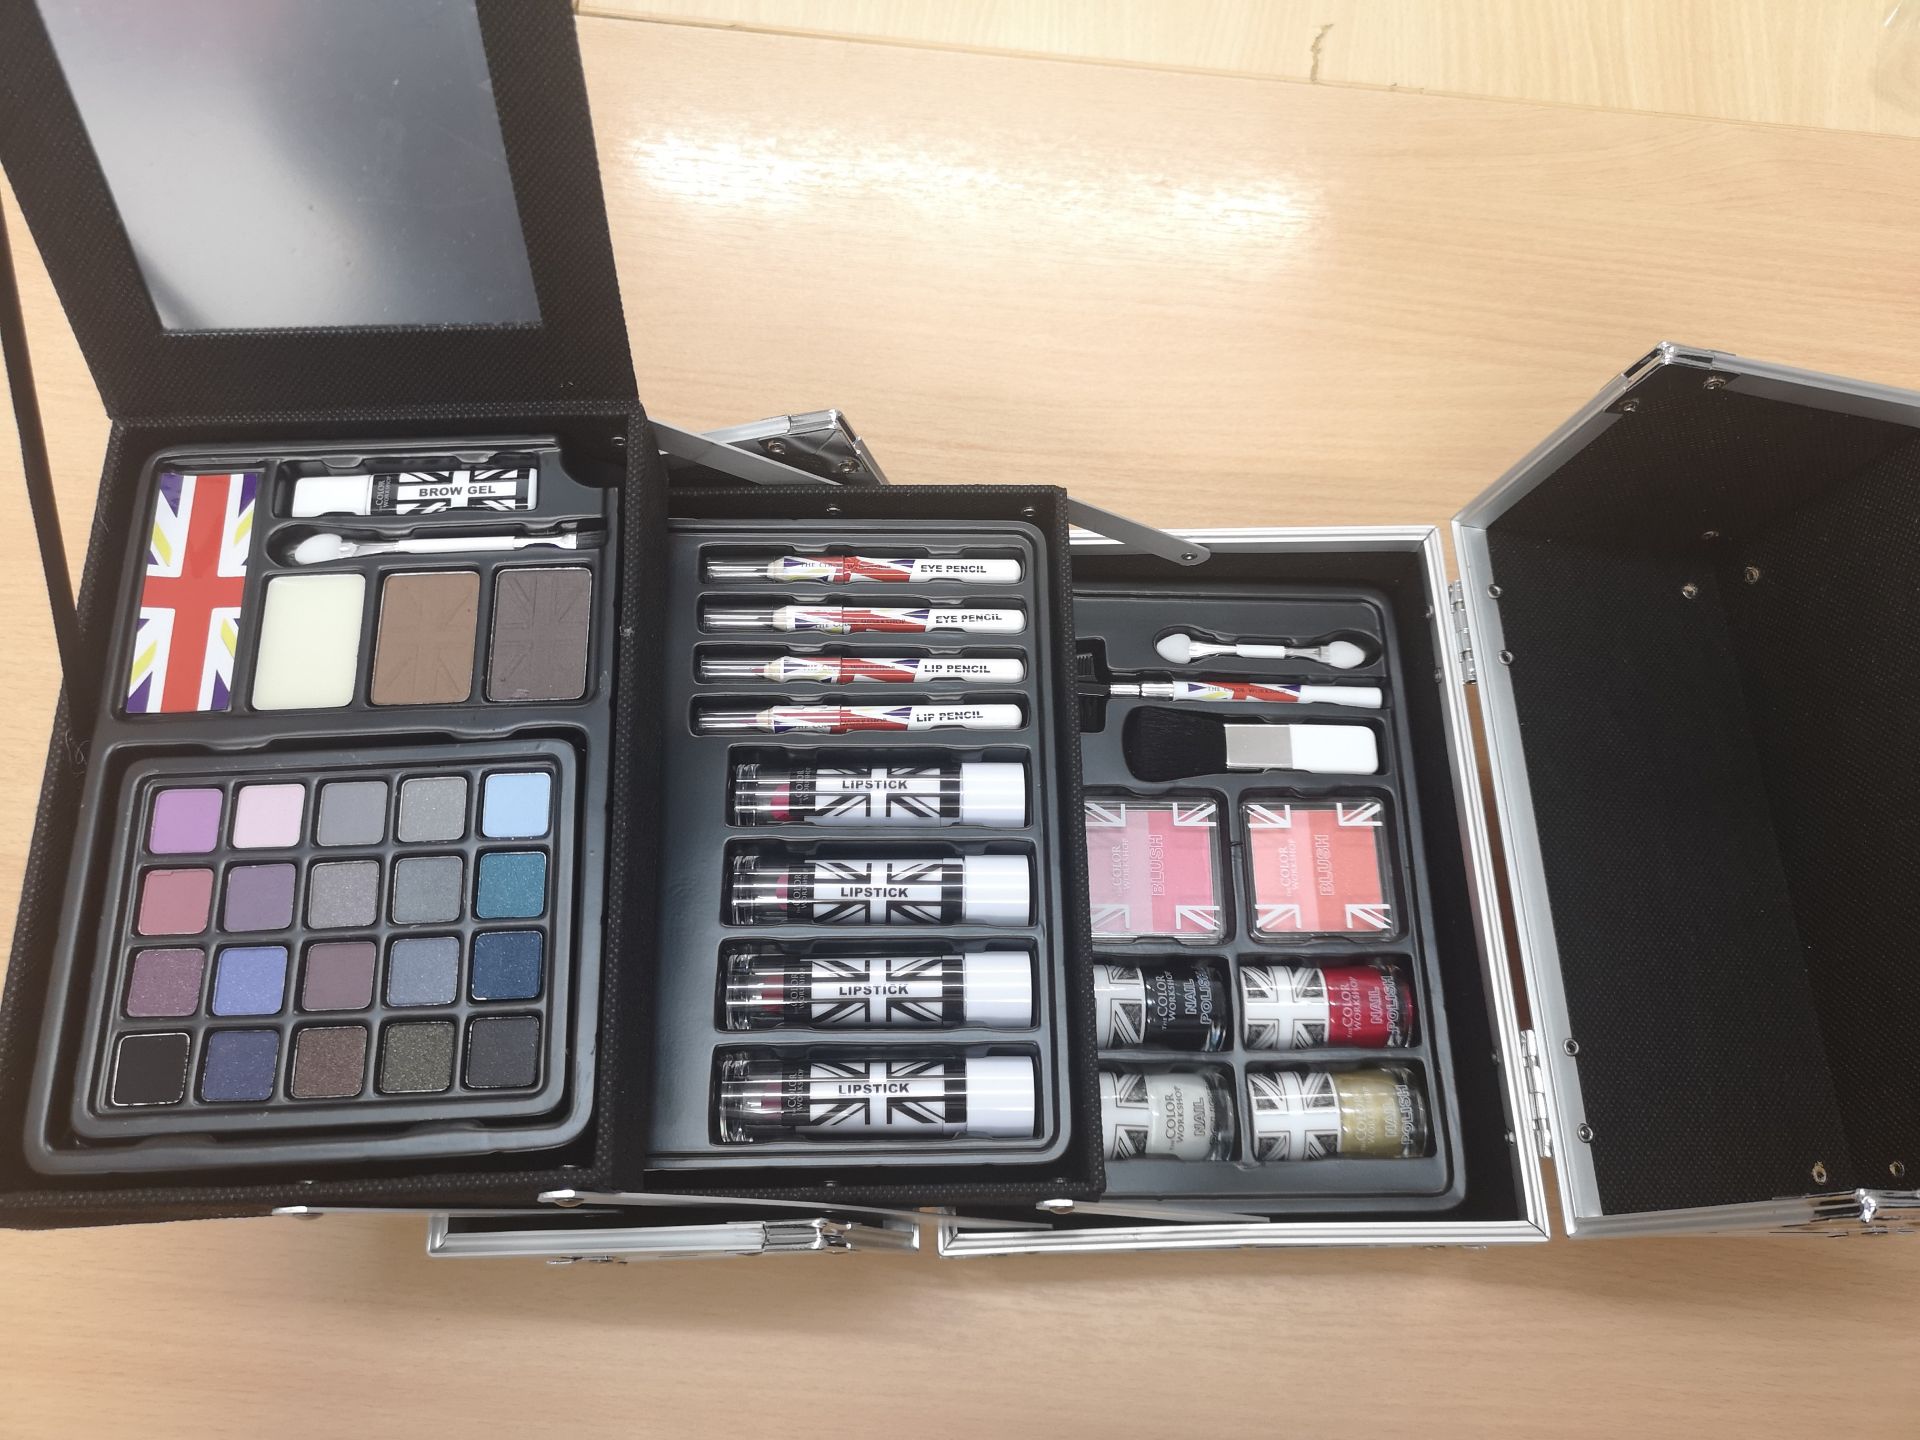 V Brand New 43 Piece Makeup Vanity Case By The Color Institute - Includes 20 Colour Eyeshadow - Image 2 of 5